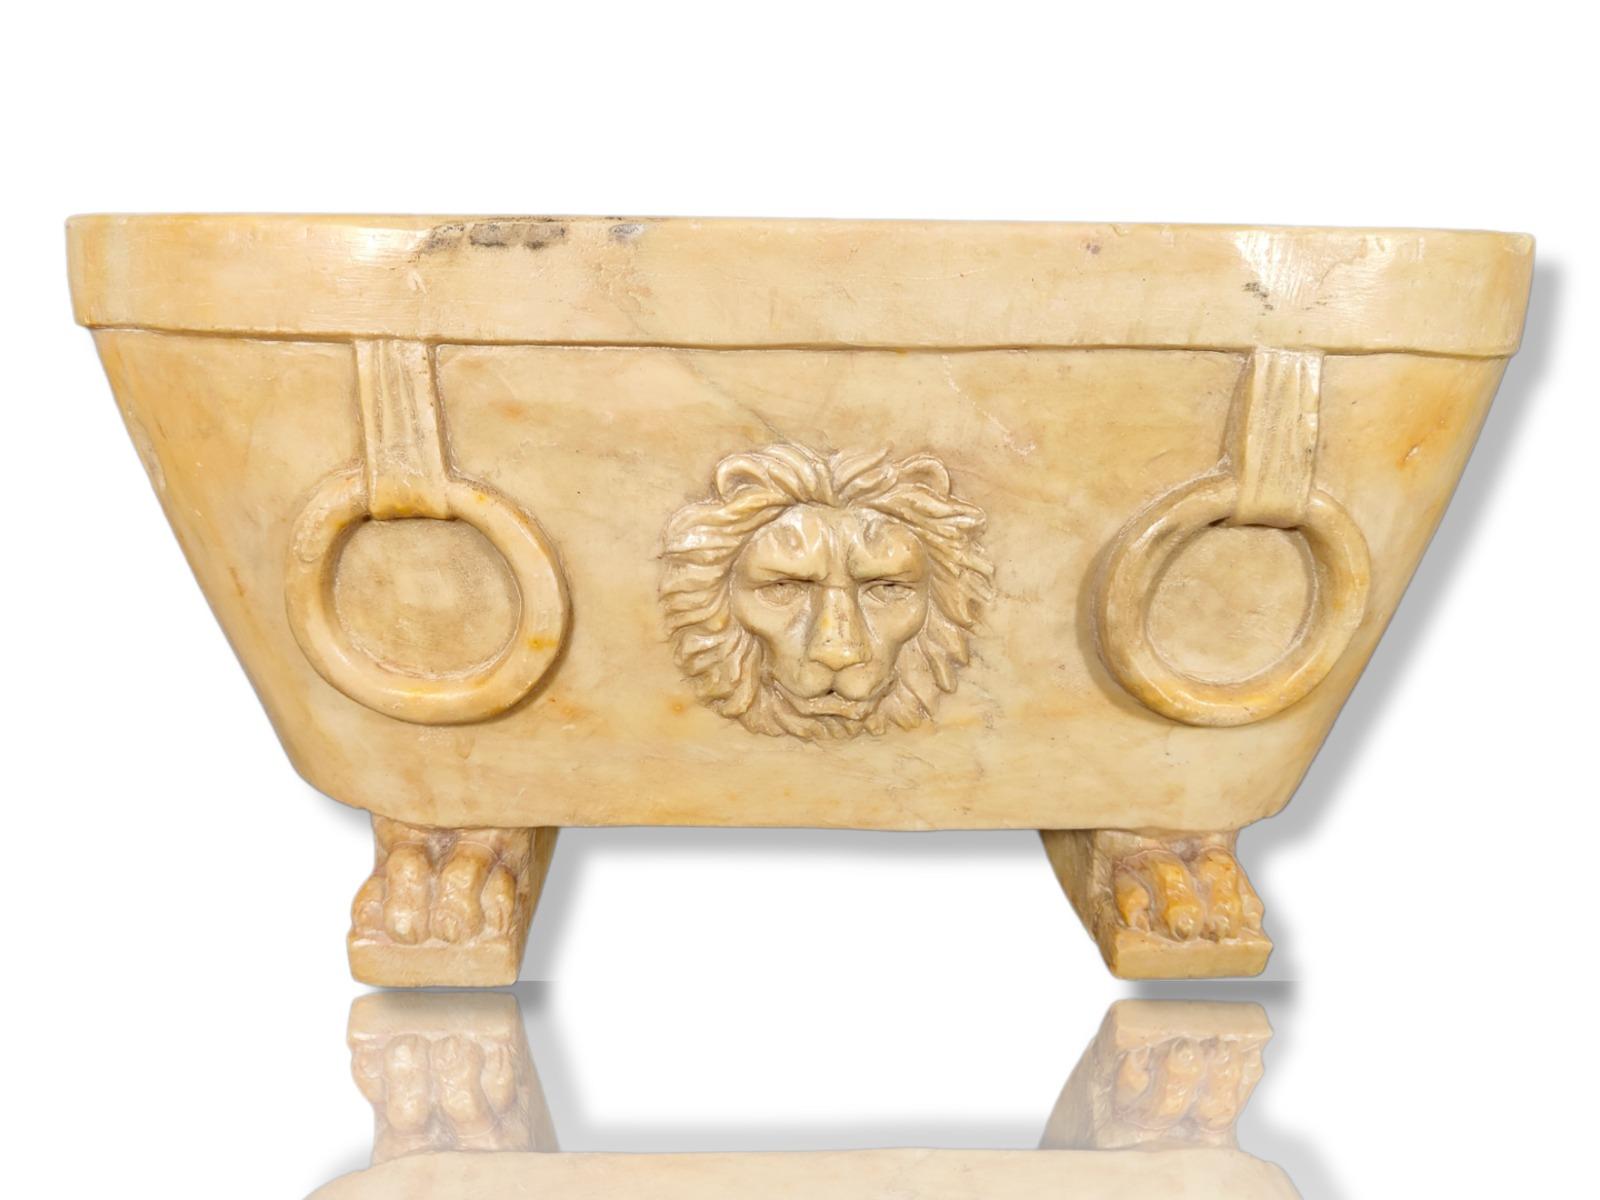 Hand-Crafted Original 18th Century Roman Marble Lion Bath     For Sale